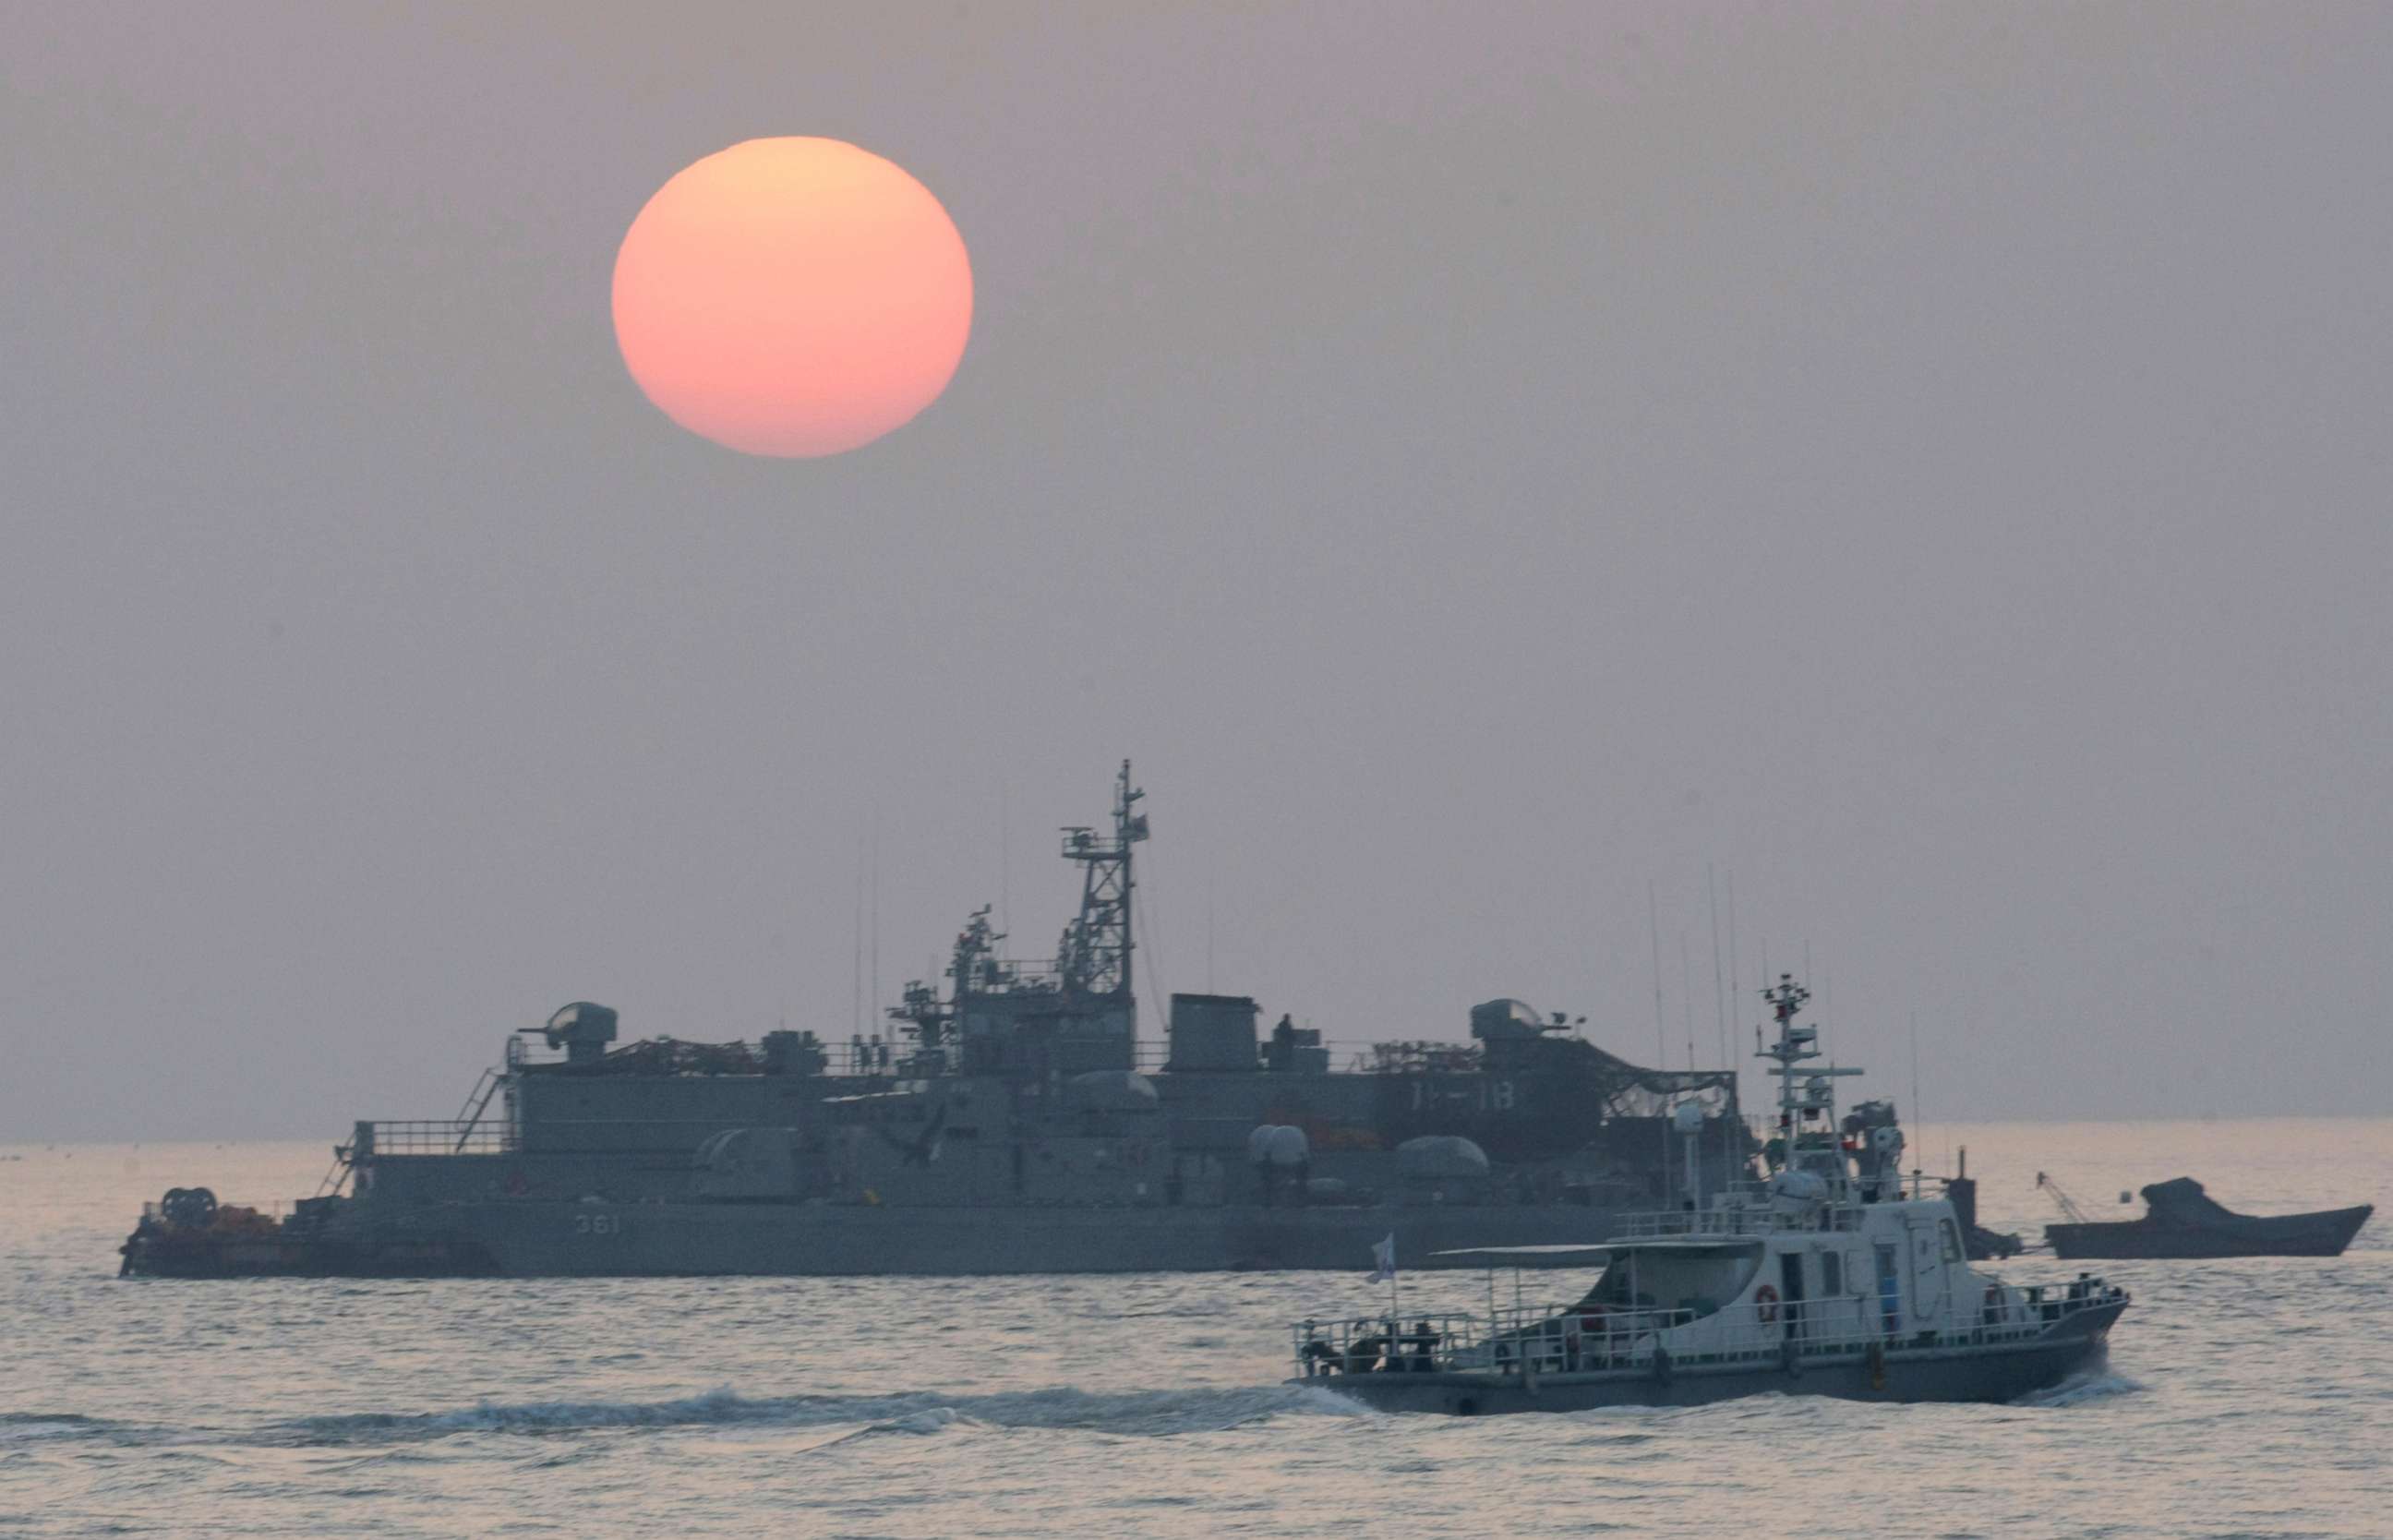 PHOTO: FILE - In this Dec. 22, 2010, file photo, a government ship sails past the South Korean Navy's floating base as the sun rises near Yeonpyeong island, South Korea. 